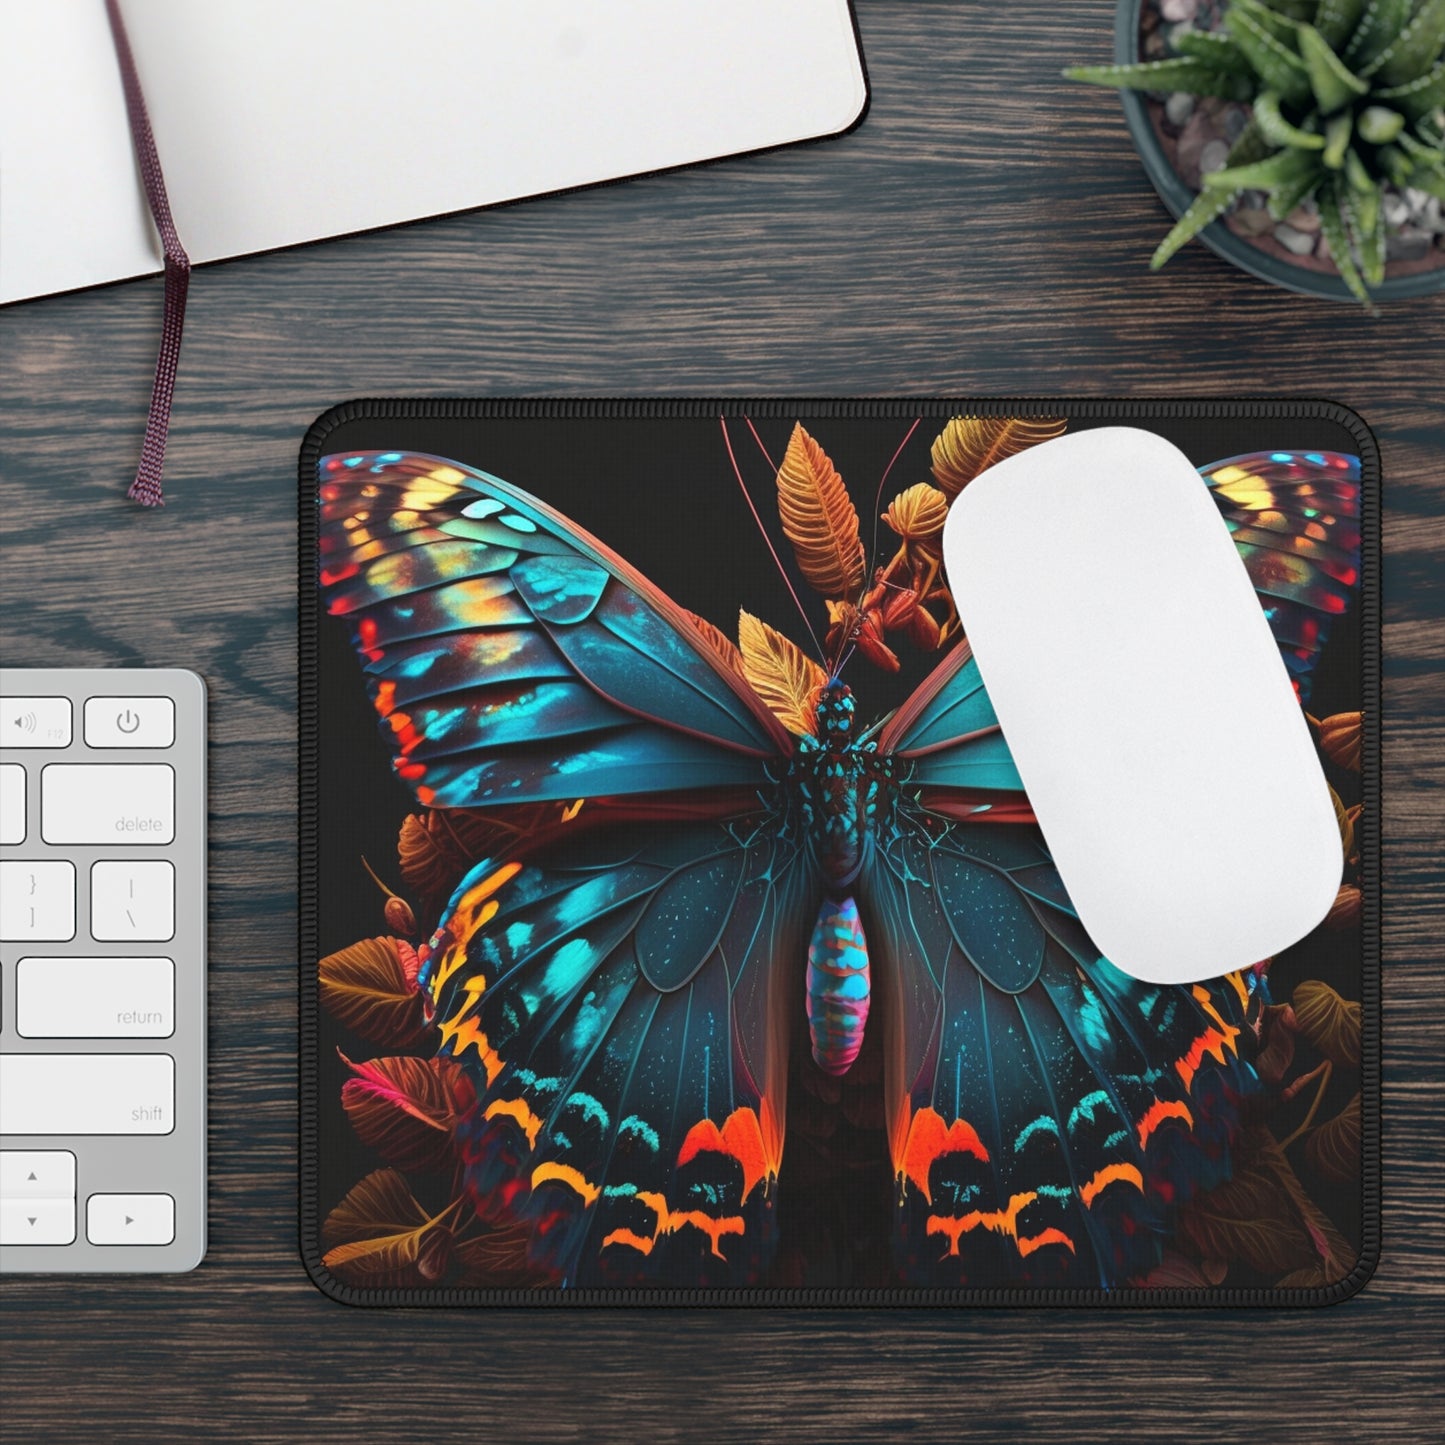 Gaming Mouse Pad  Hue Neon Butterfly 1